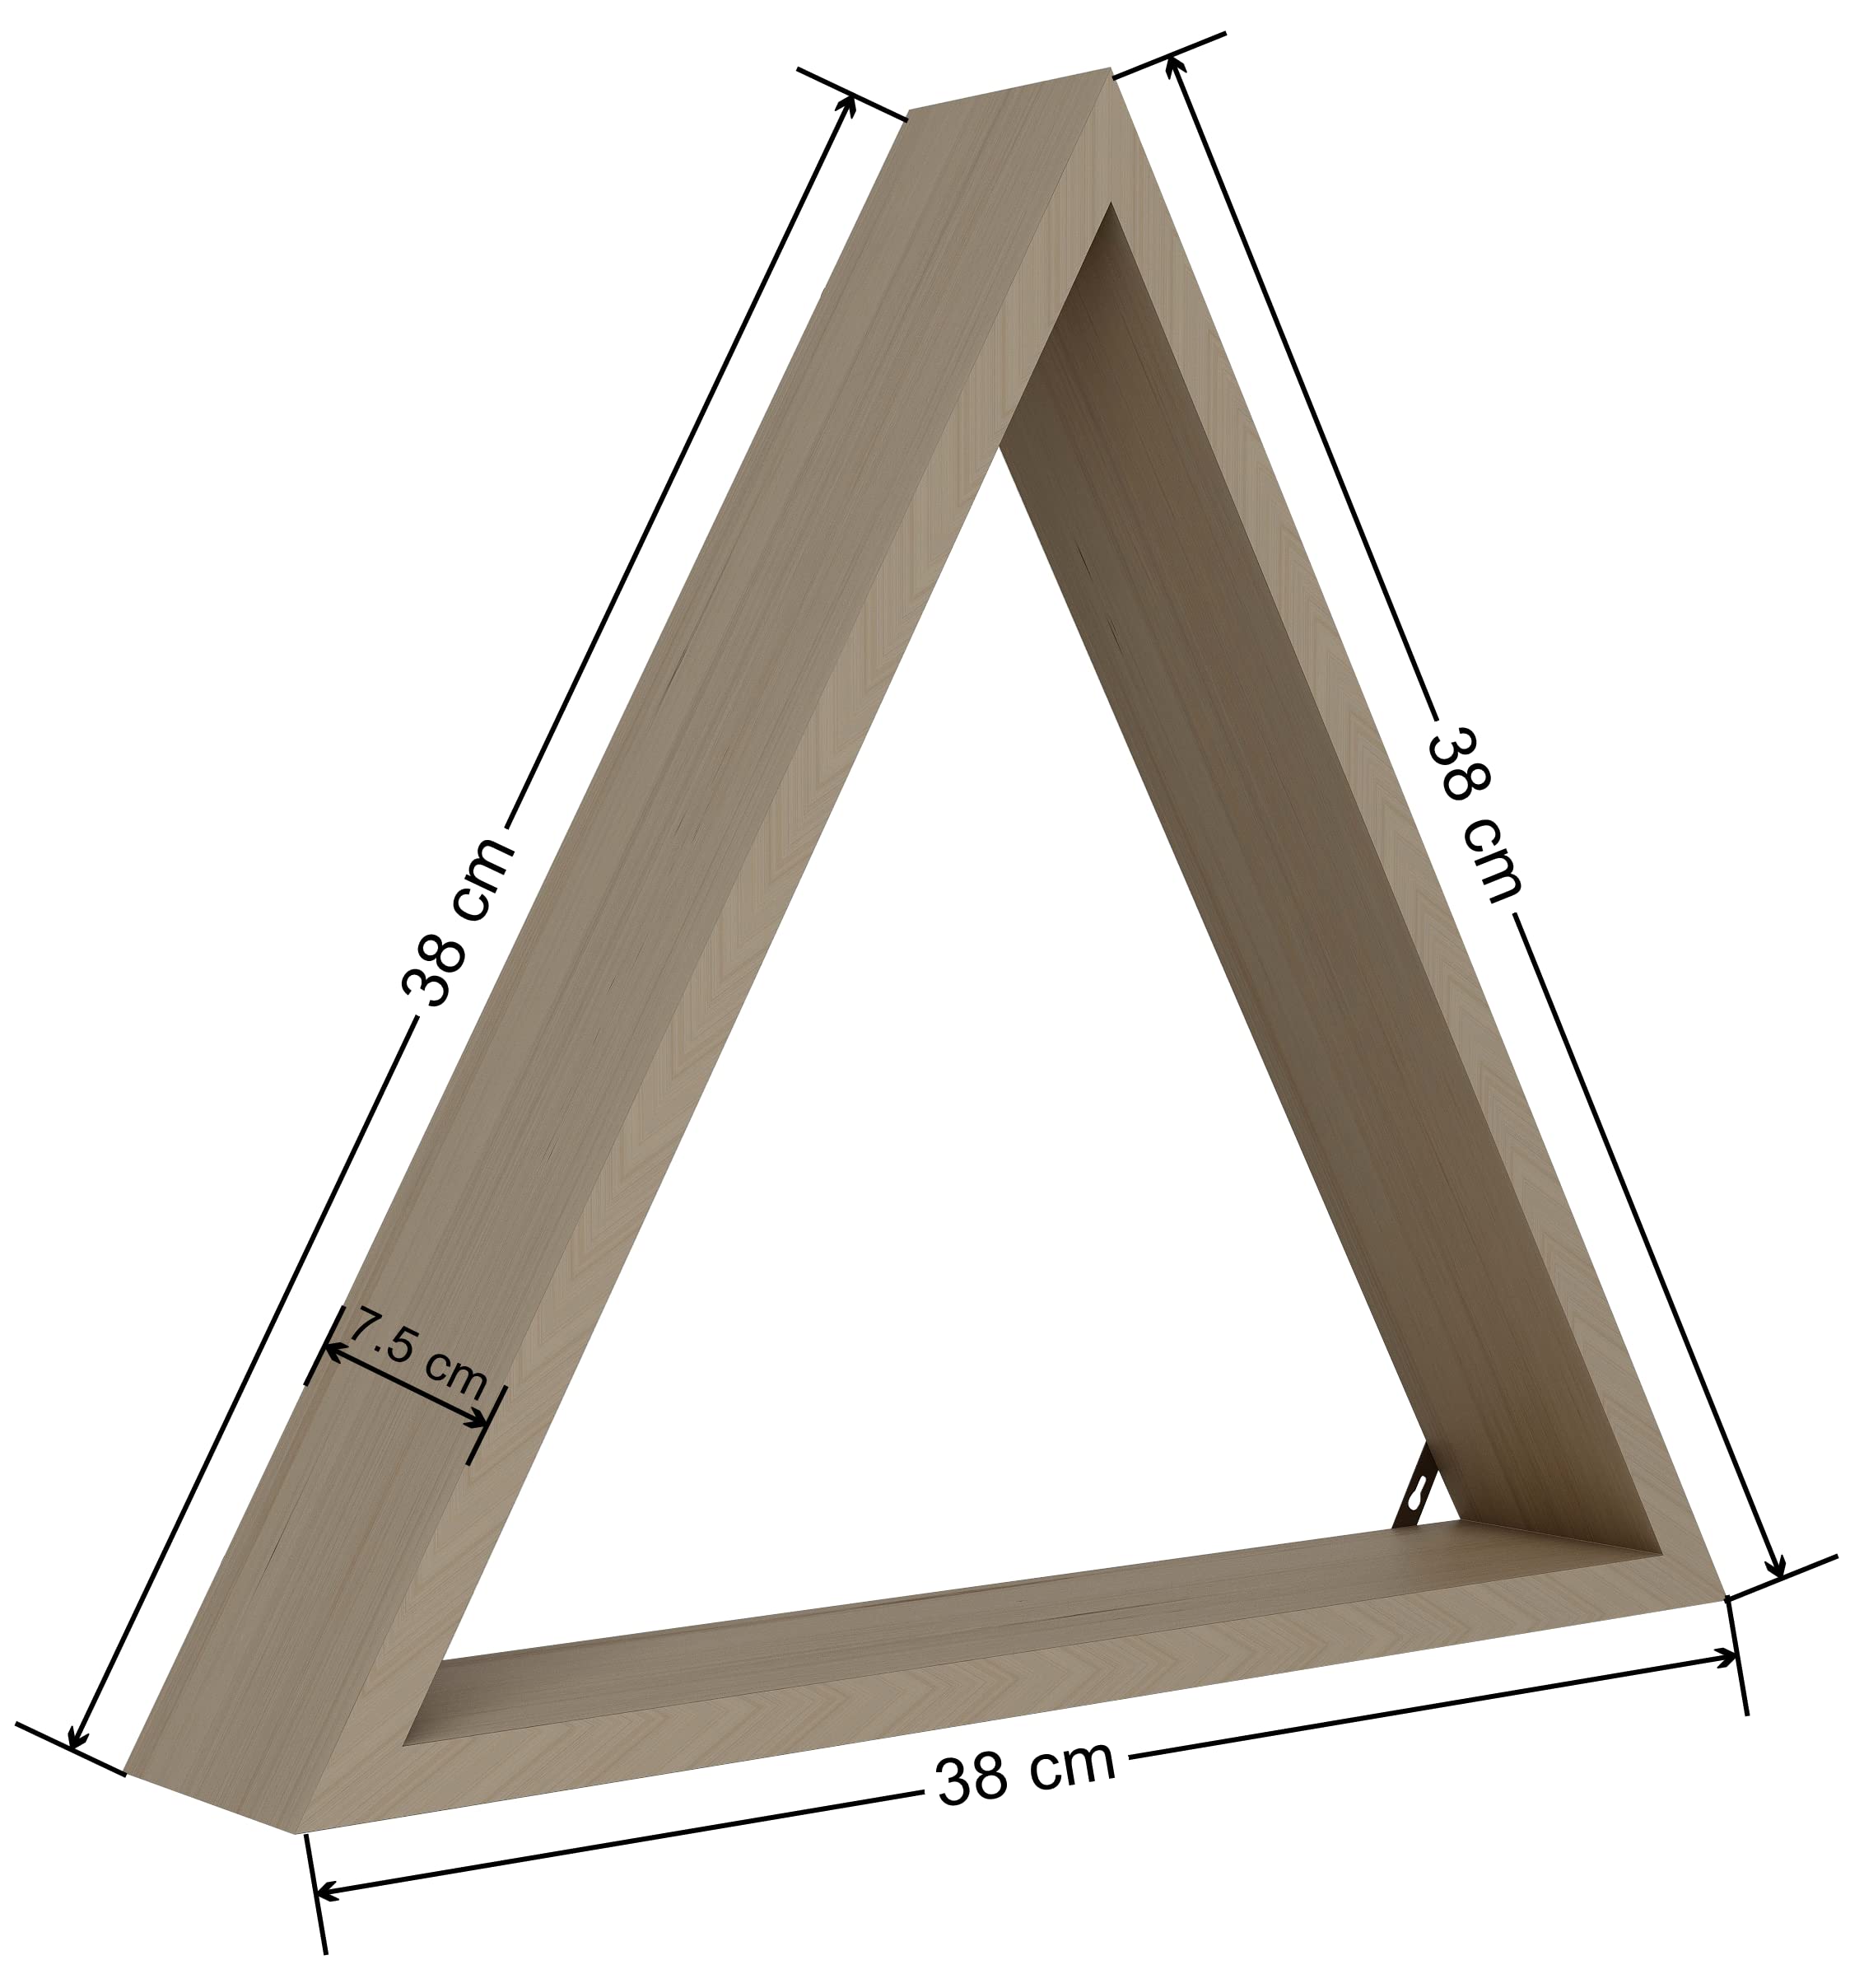 Plantex Semi-Finished Steam Beech Wooden Made Triangle Display Shelf/Wall-Mounting Bathroom Shelf/Hanging Kitchen Rack for Kitchen/Living Room/Bathroom/Laundry Room (Pack of 3)